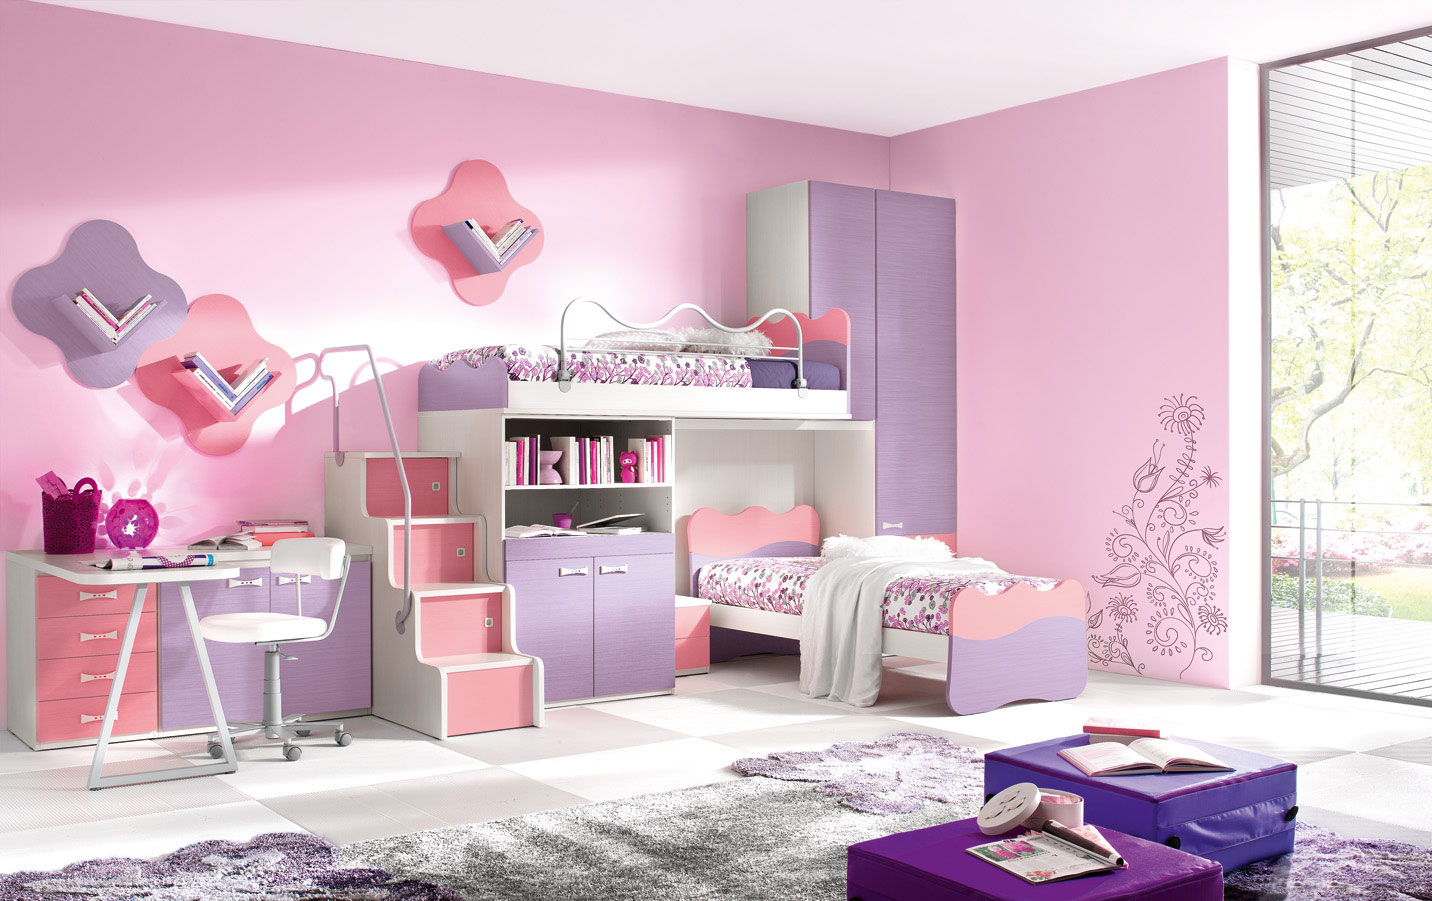 Purple Pink Ideas Surprising Purple Pink Cute Bedroom Ideas For Teenage Girls With Bunk Beds Combined With Cupboards Furnished With Desk And White Chair Plus Completed With Rug Cute Bedroom Ideas For Enhancing House Interior